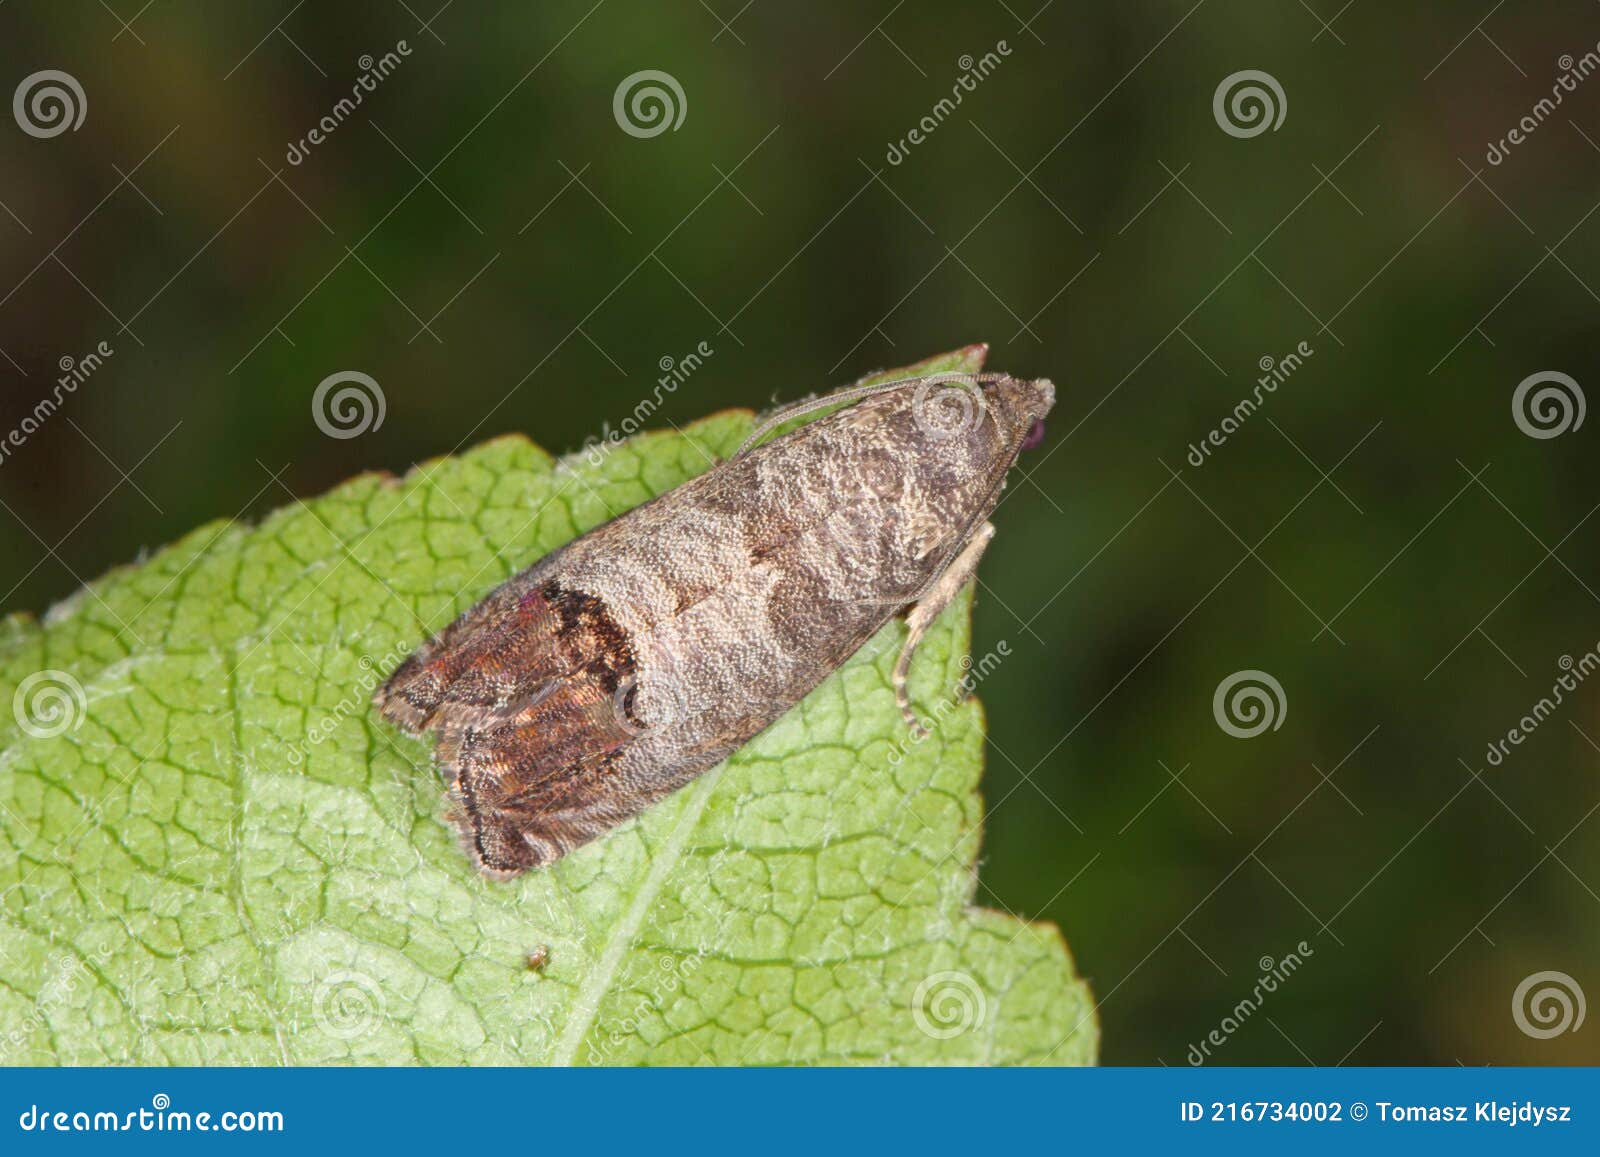 the codling moth cydia pomonella is a member of the lepidopteran family tortricidae. it is major pests to agricultural crops